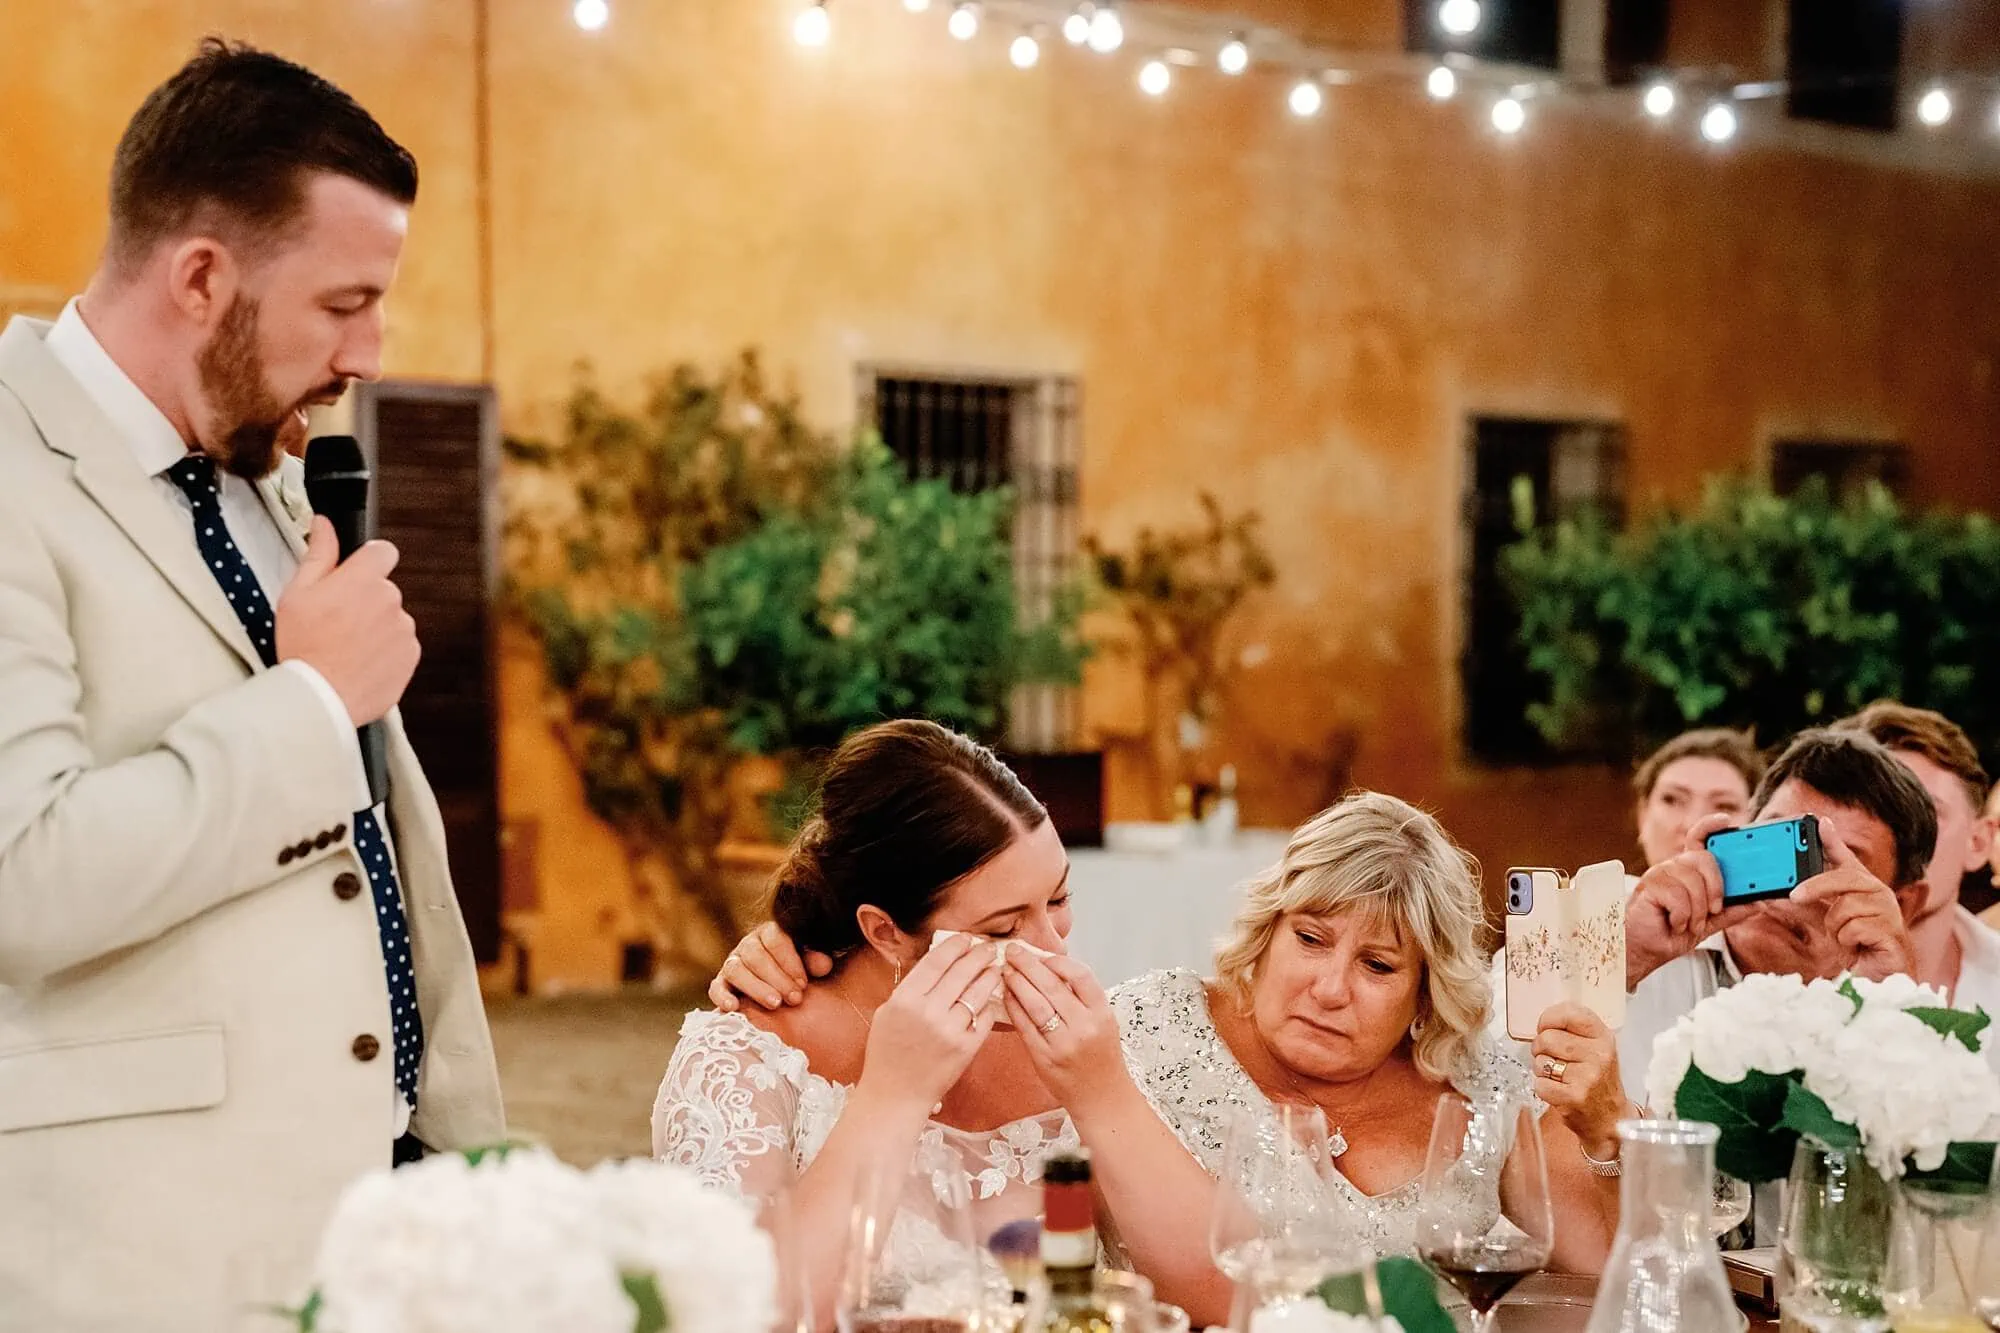 Crying bride during the speeches in Italy